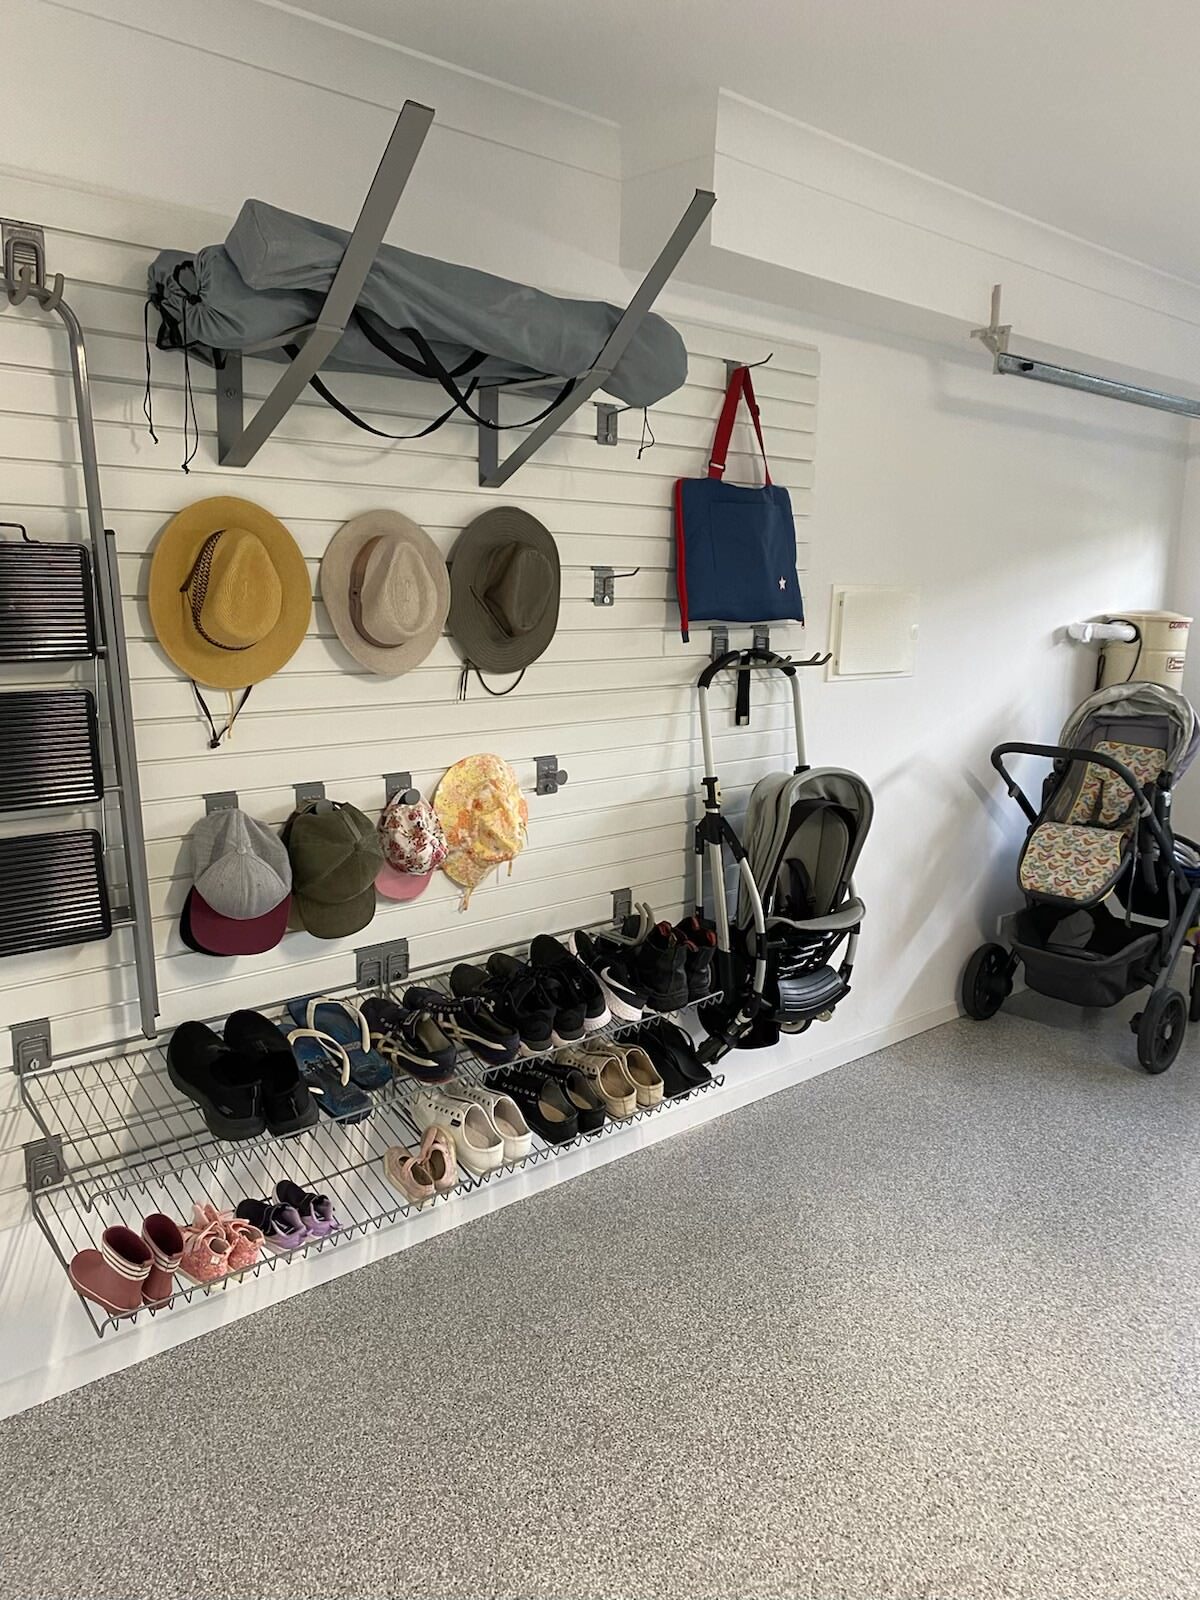 Hats and shoes, hung with StoreWALL.